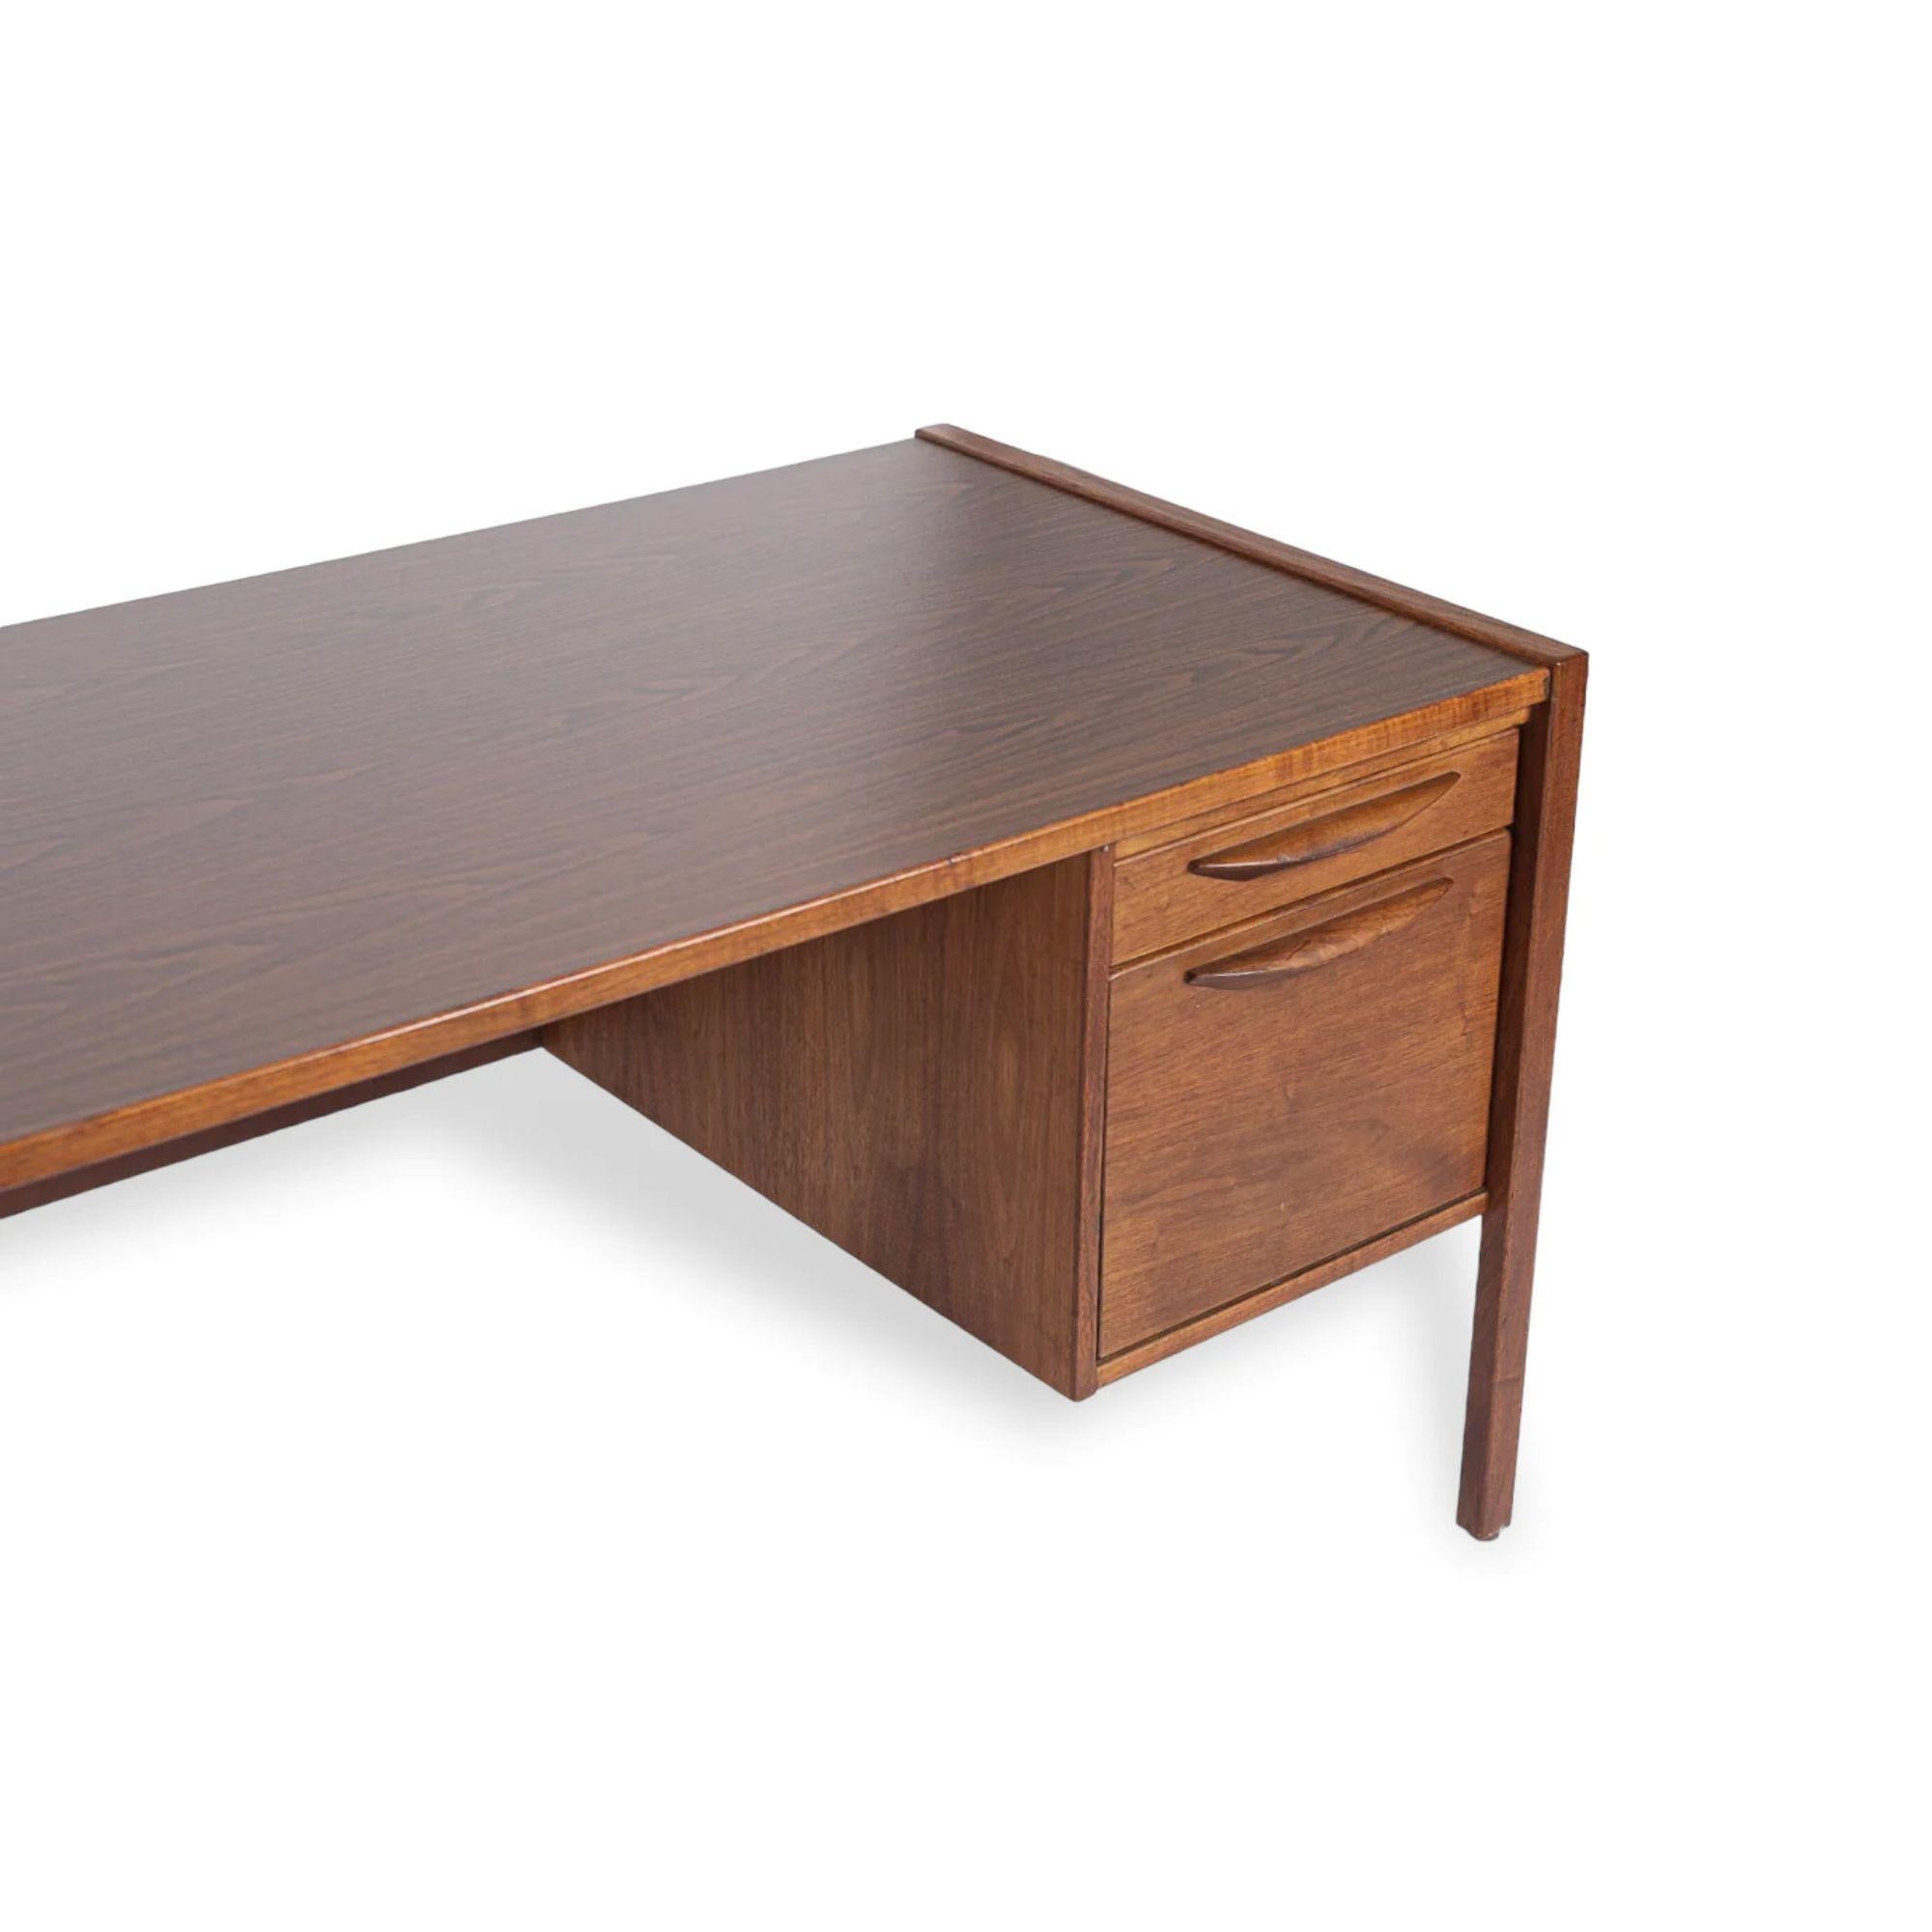 20th Century 1960s Midcentury Desk in Wood & Laminate by Jens Risom For Sale